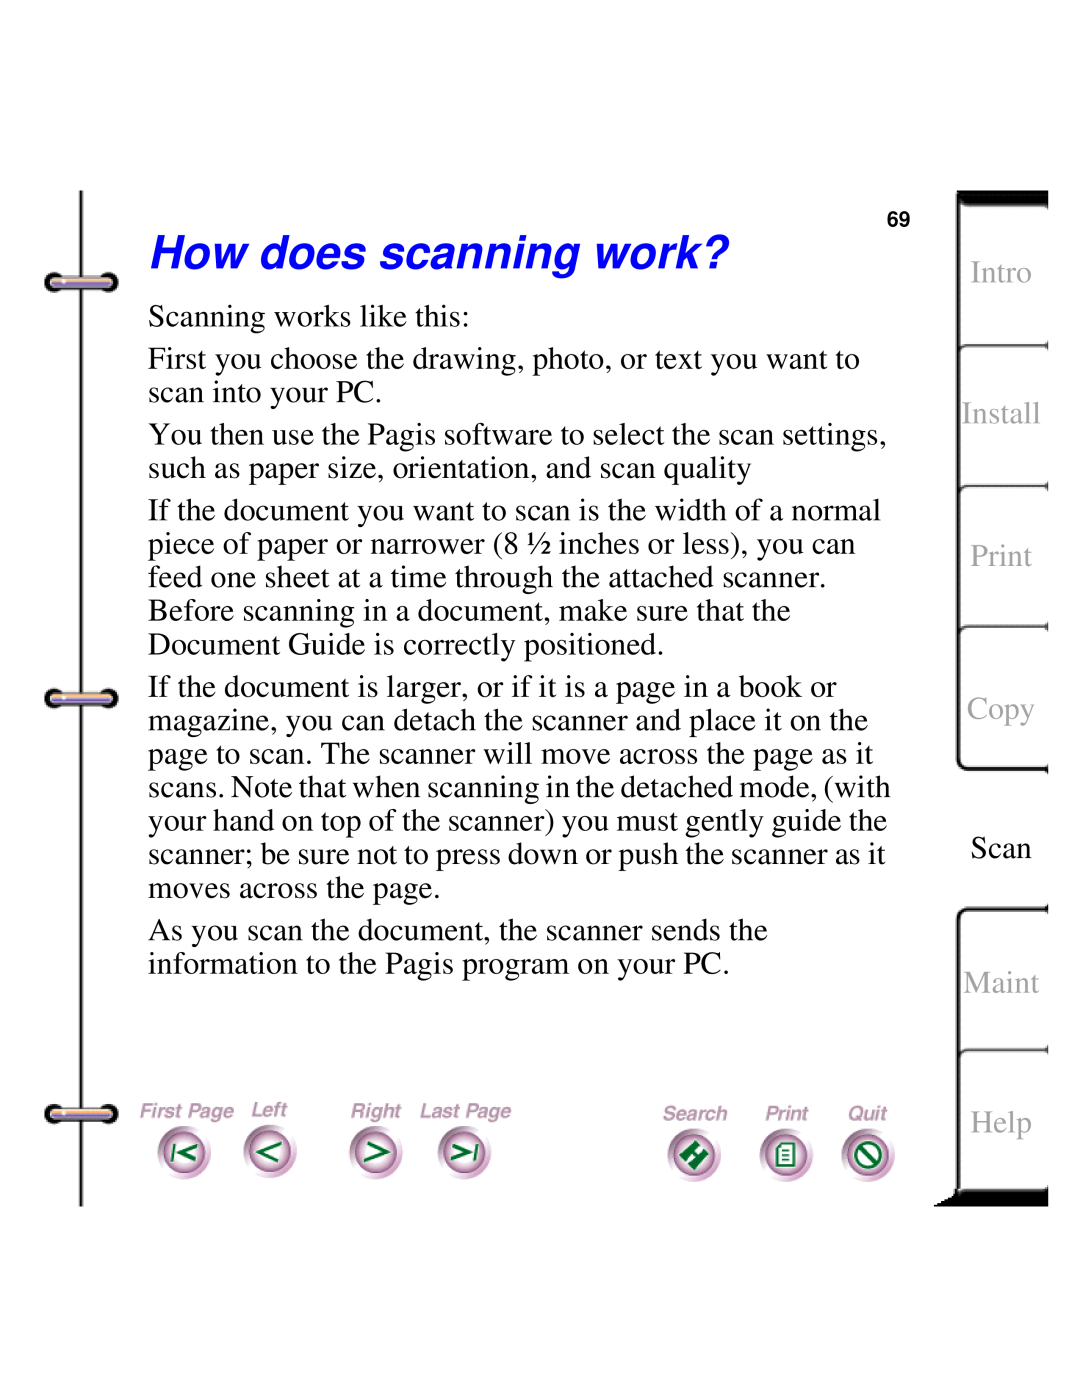 Xerox Document HomeCentre manual How does scanning work?, Intro Install Print Copy, Maint, Help 